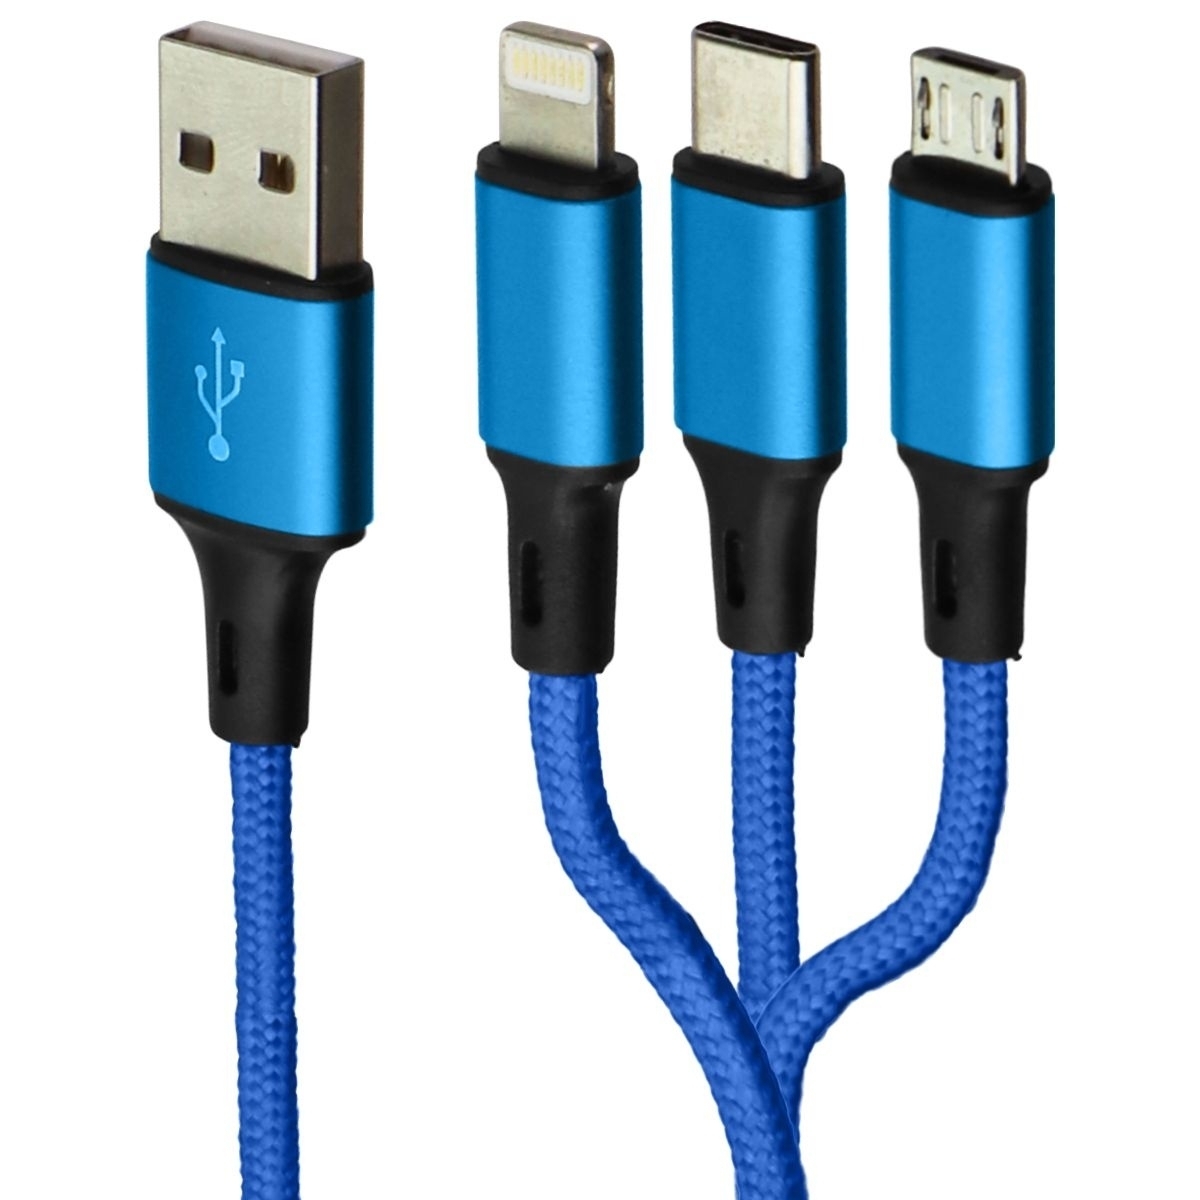 Zoda 3-in-1 USB-C/Lightning 8-Pin/Micro USB Braided Cable (4FT) - Neon Blue